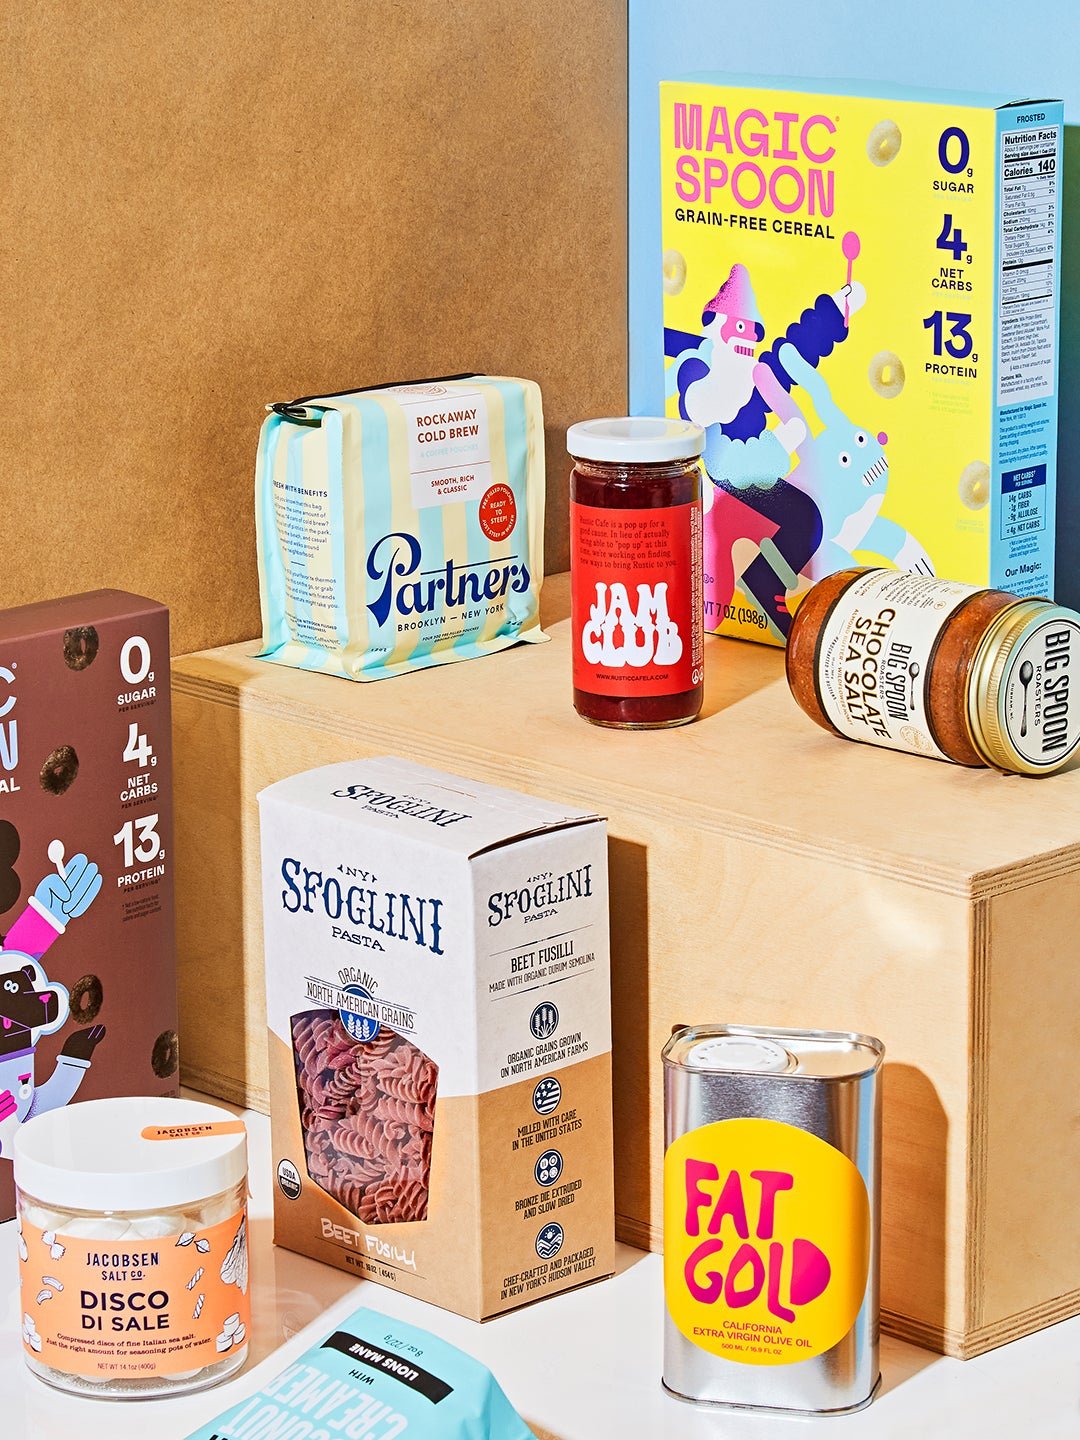 We Tested Dozens of Pretty Pantry Items to See If They Taste as Good as They Look